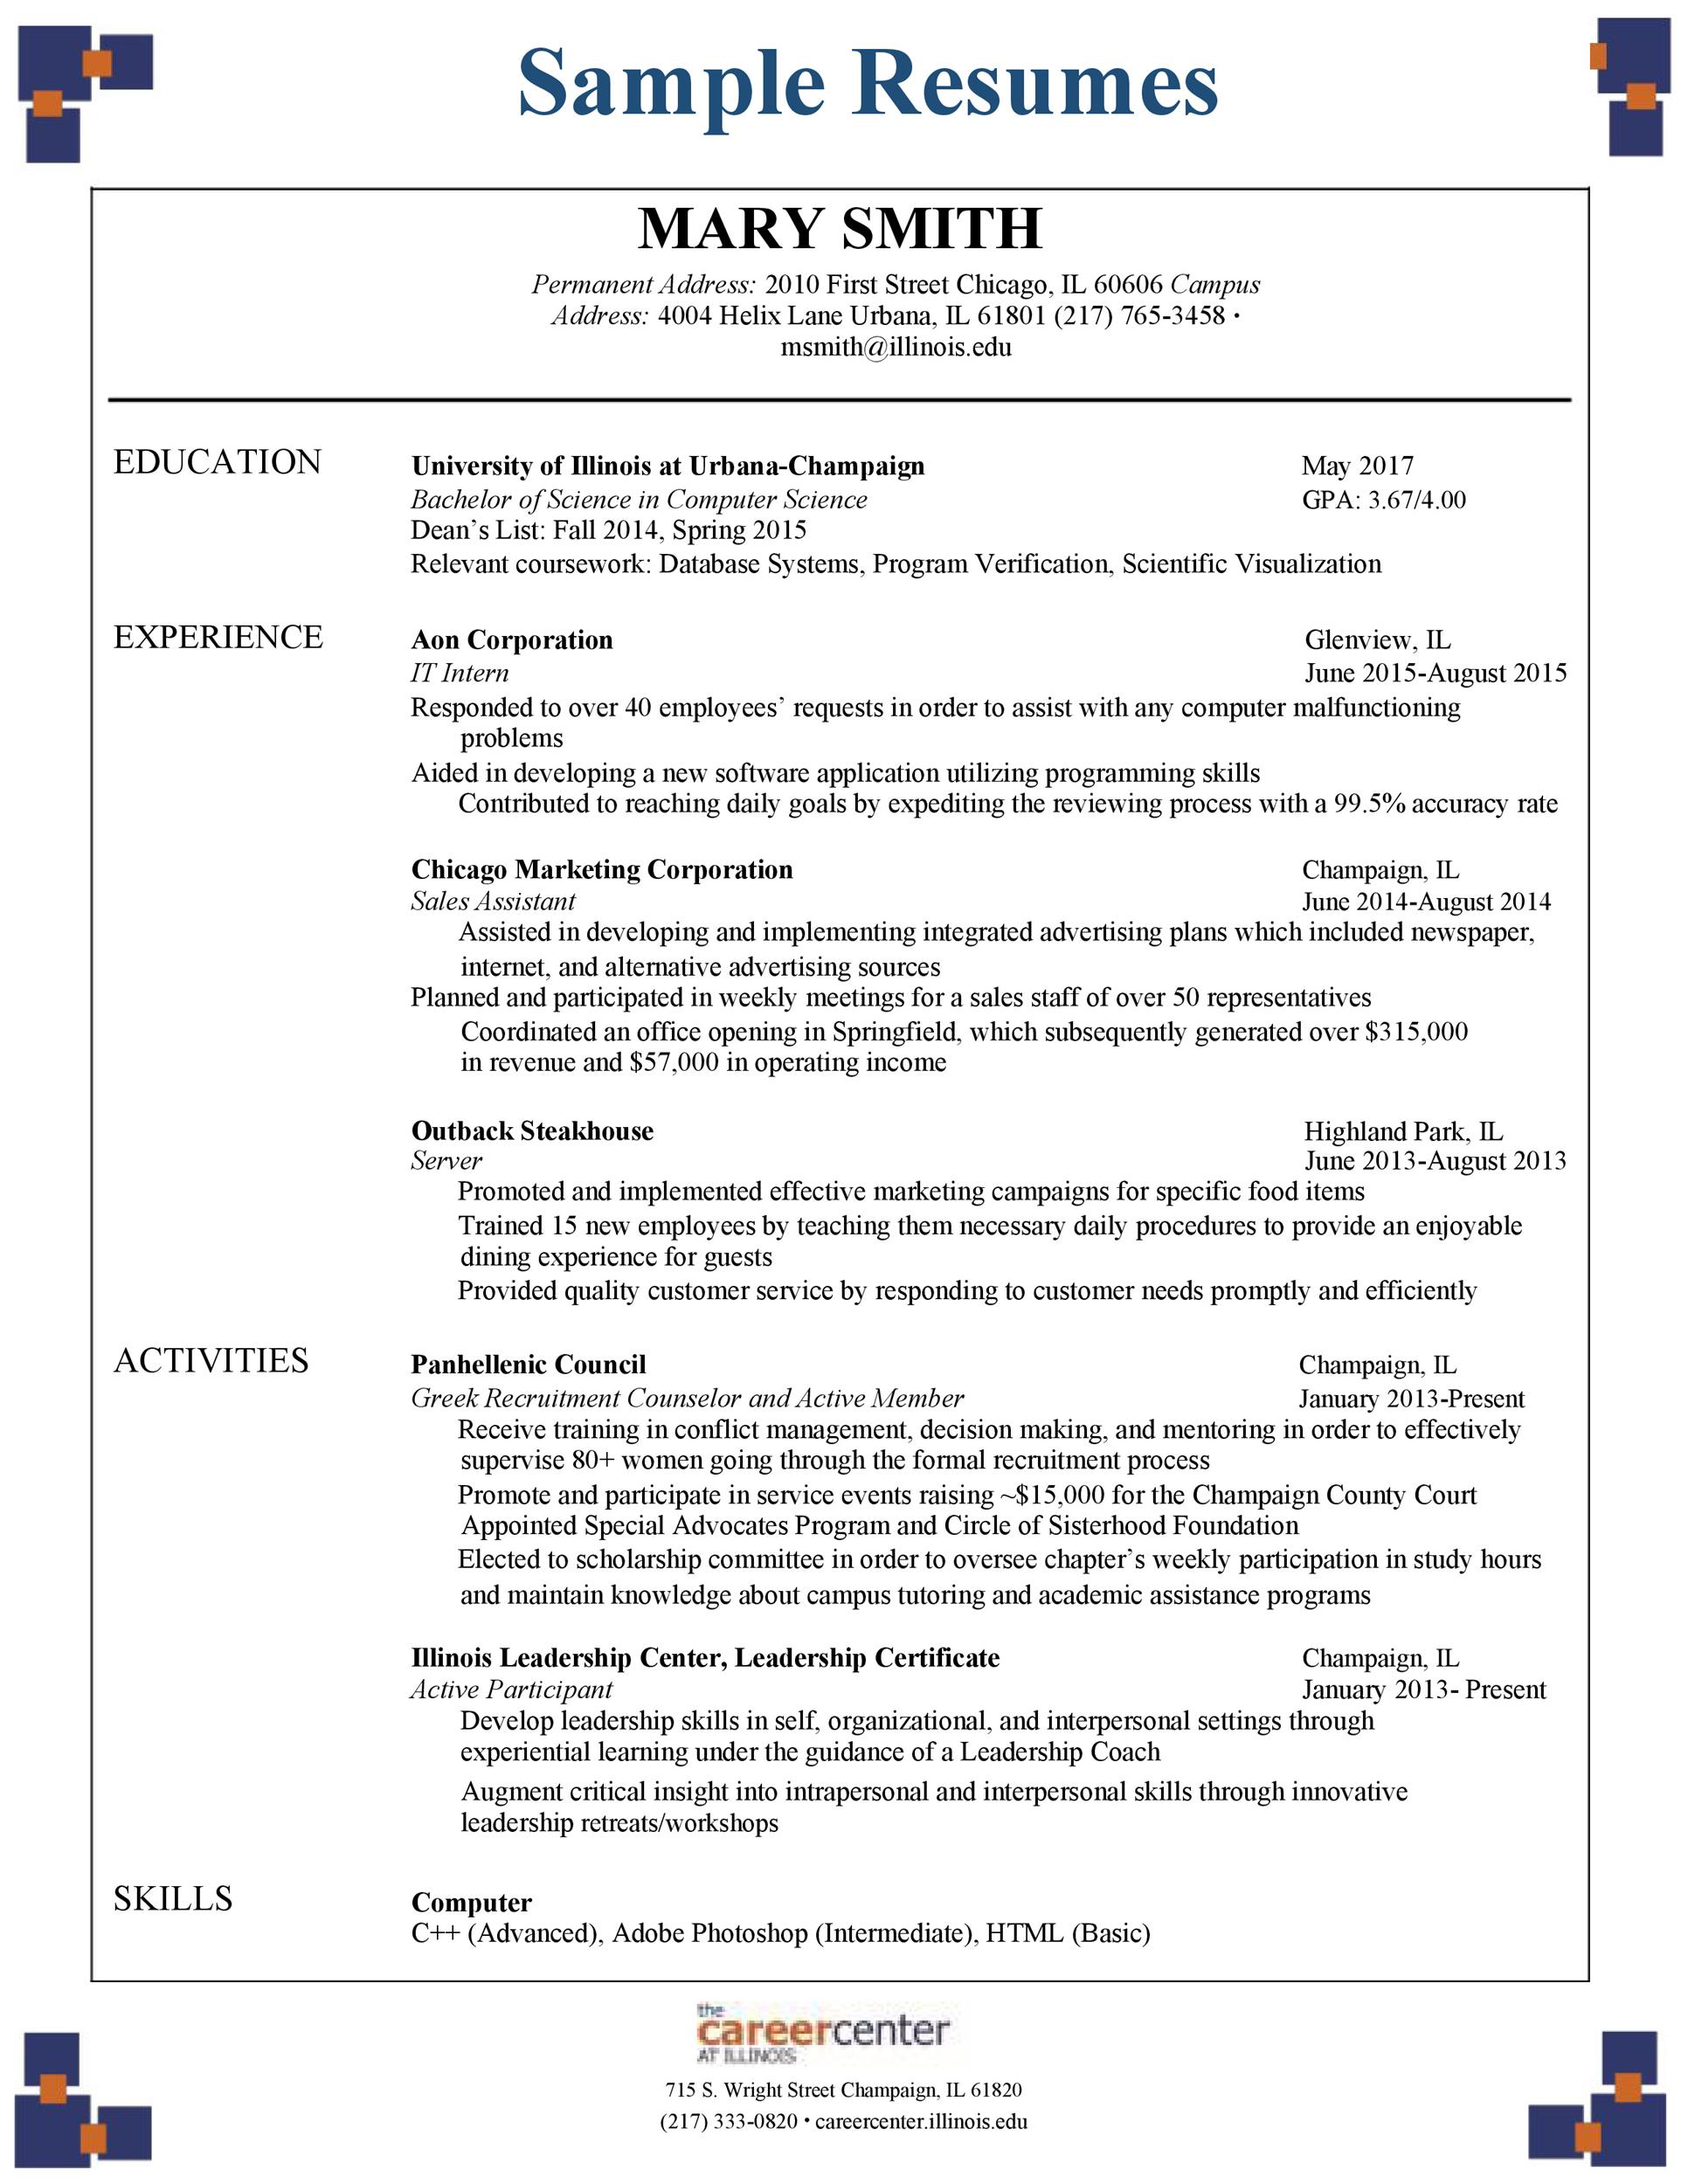 College Applicant Resume Template Database